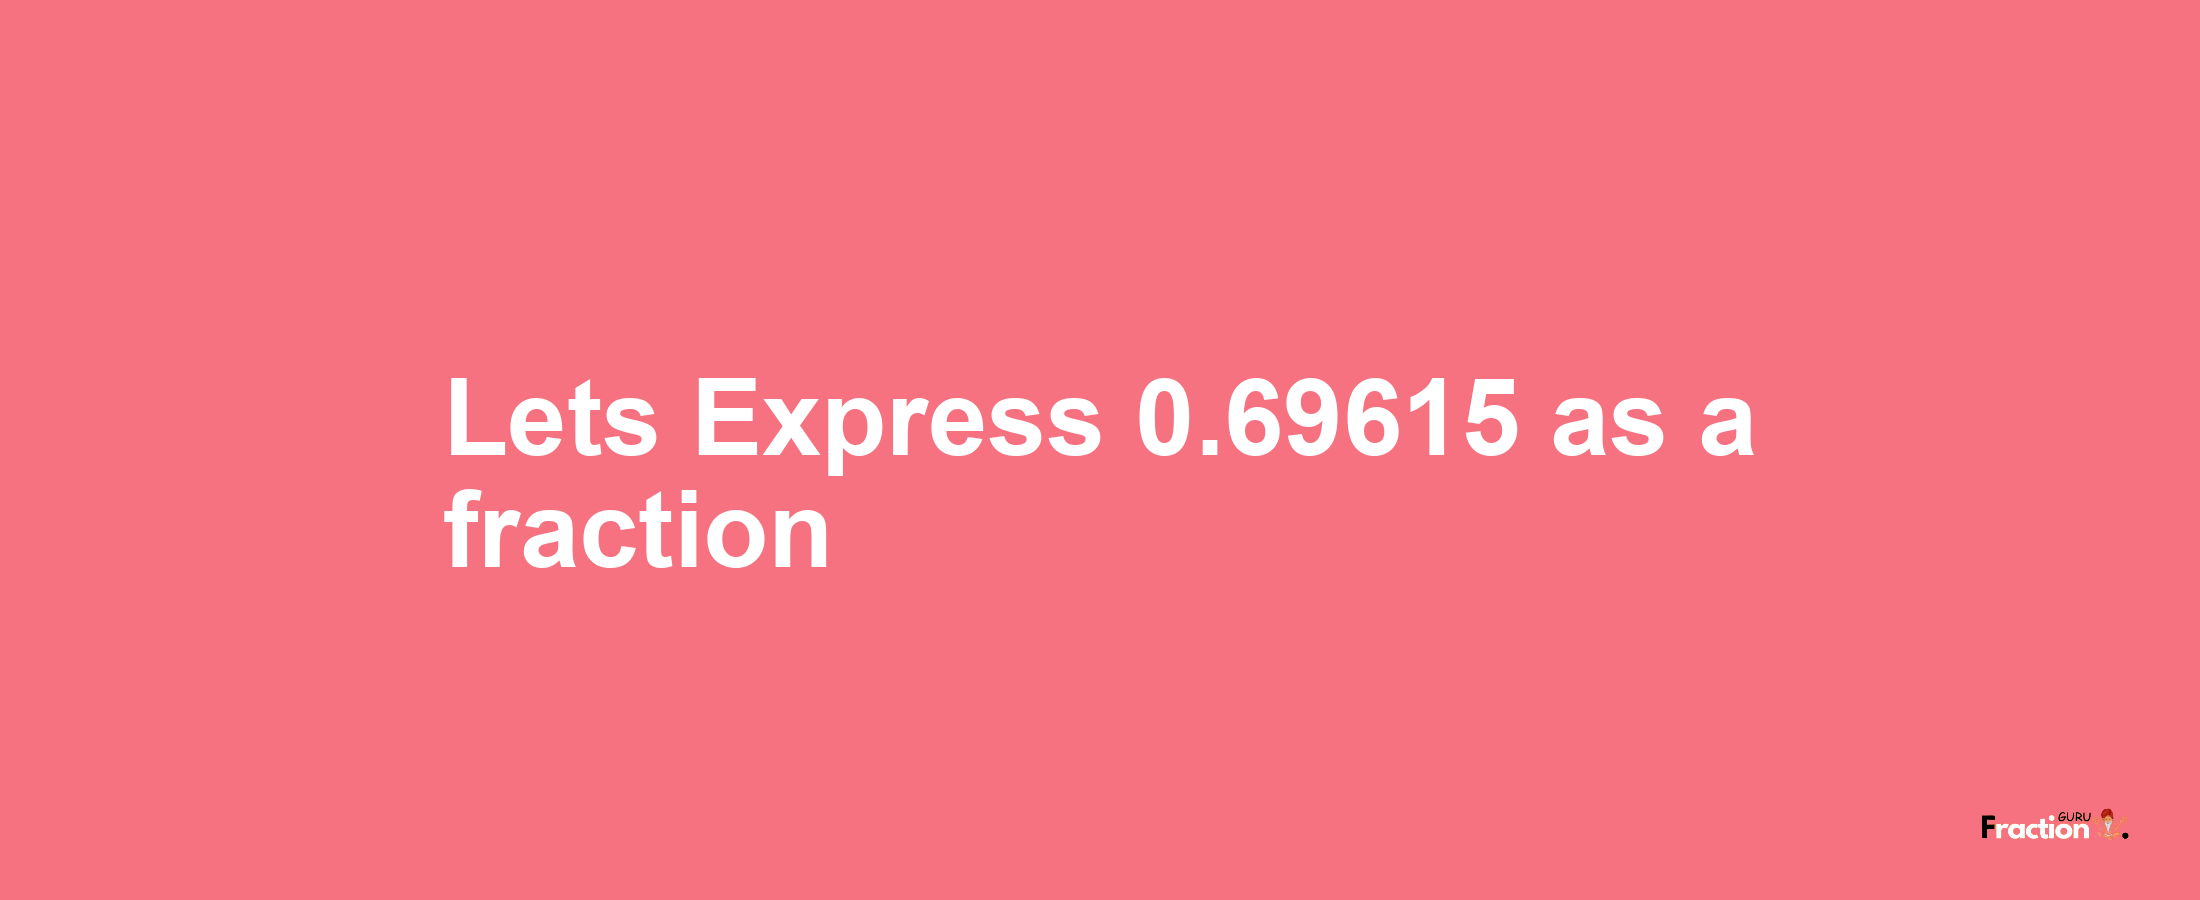 Lets Express 0.69615 as afraction